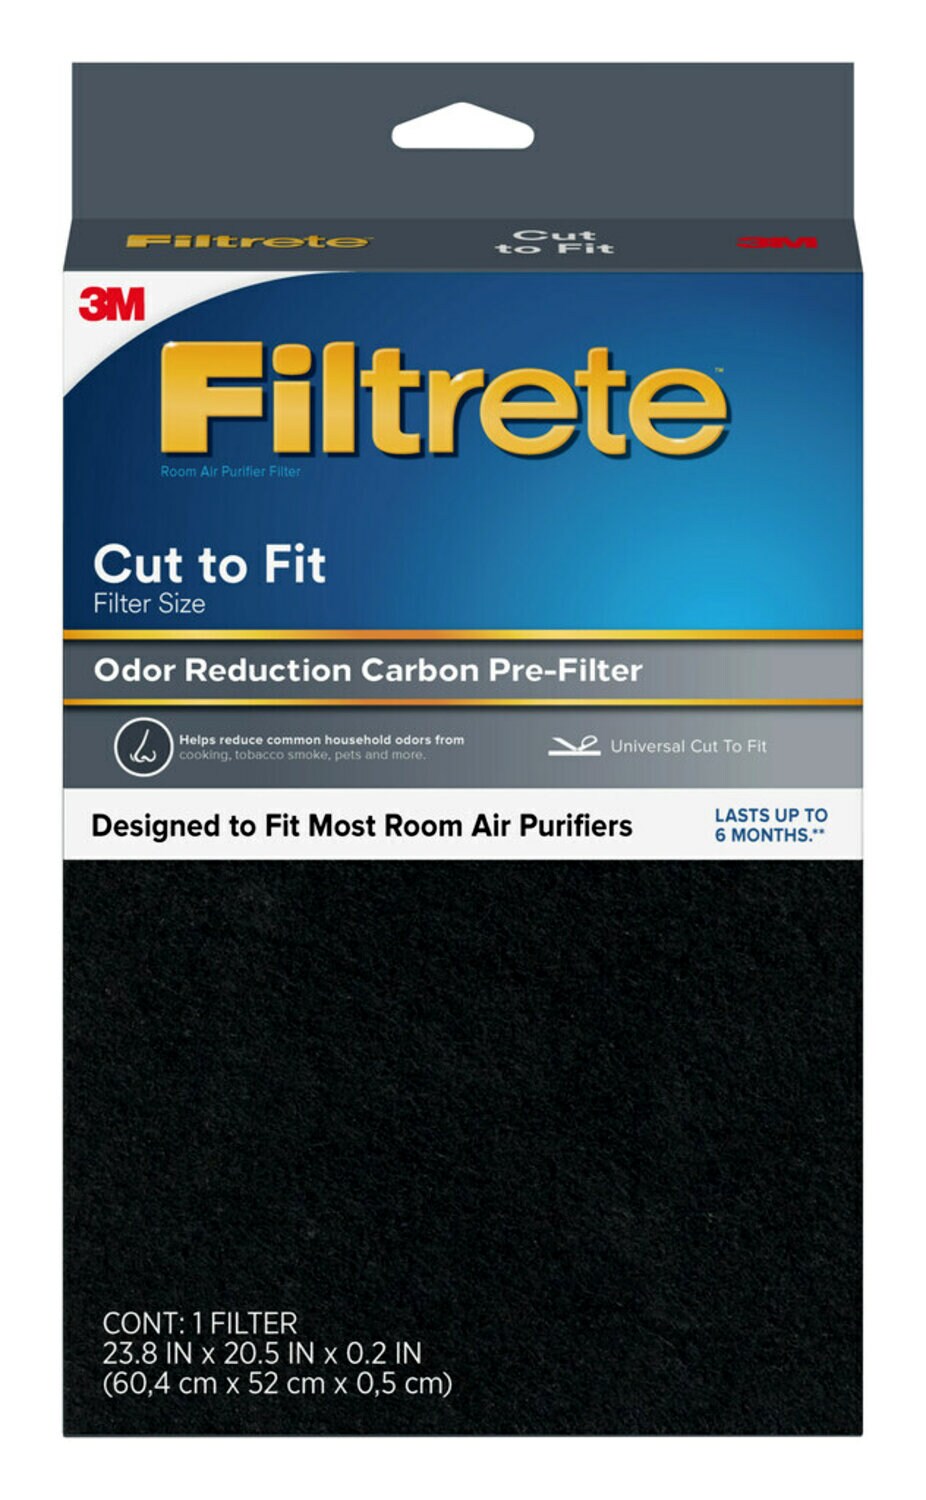 7100249701 - Filtrete Odor Reduction Carbon Prefilter Room Air Purifier Filter FAPF-UCTFN-4, Universal Cut to Fit